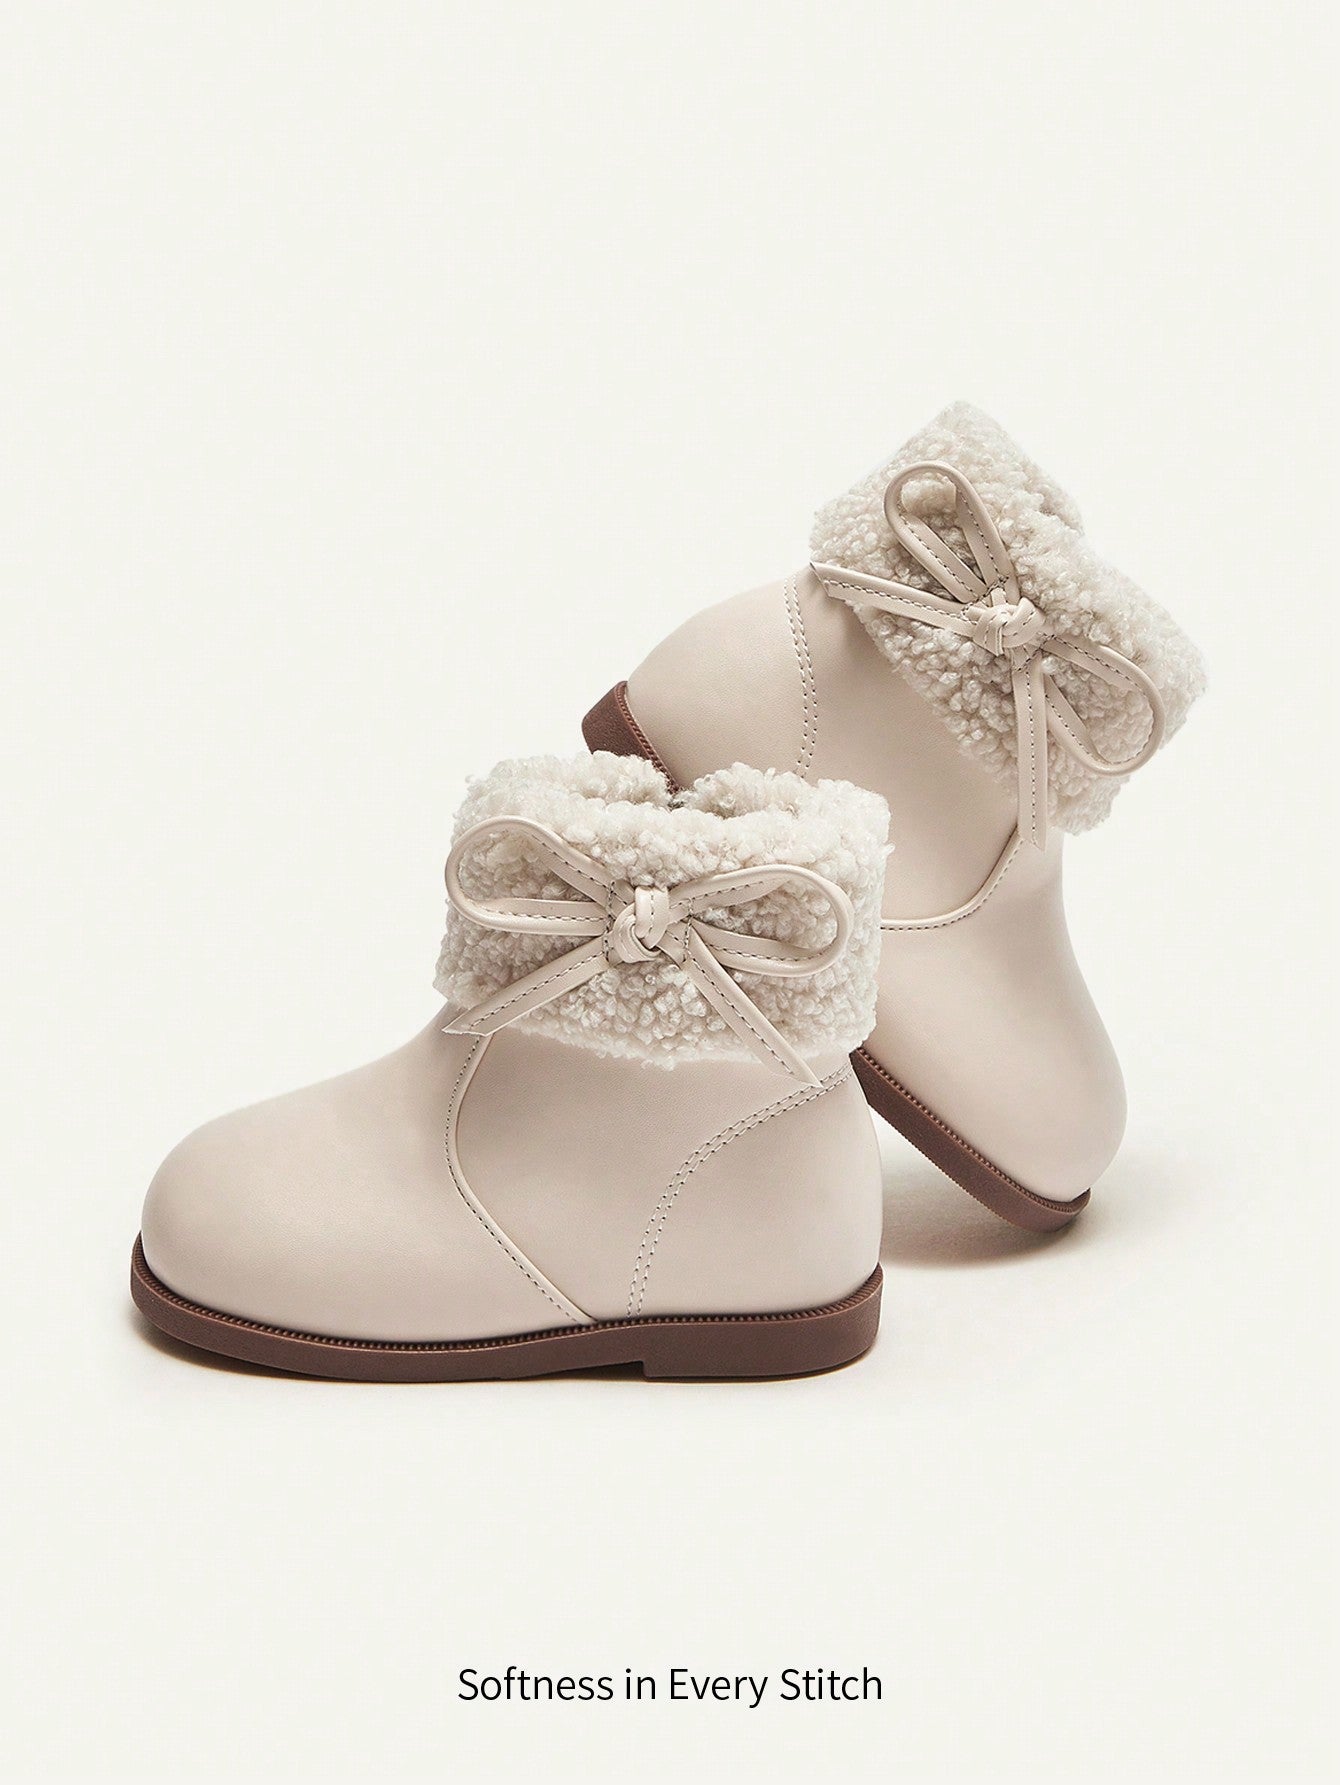 Cute Fashionable Bowknot Design Plush Lined Warm Baby Soft Sole Anti-slip Short Boots